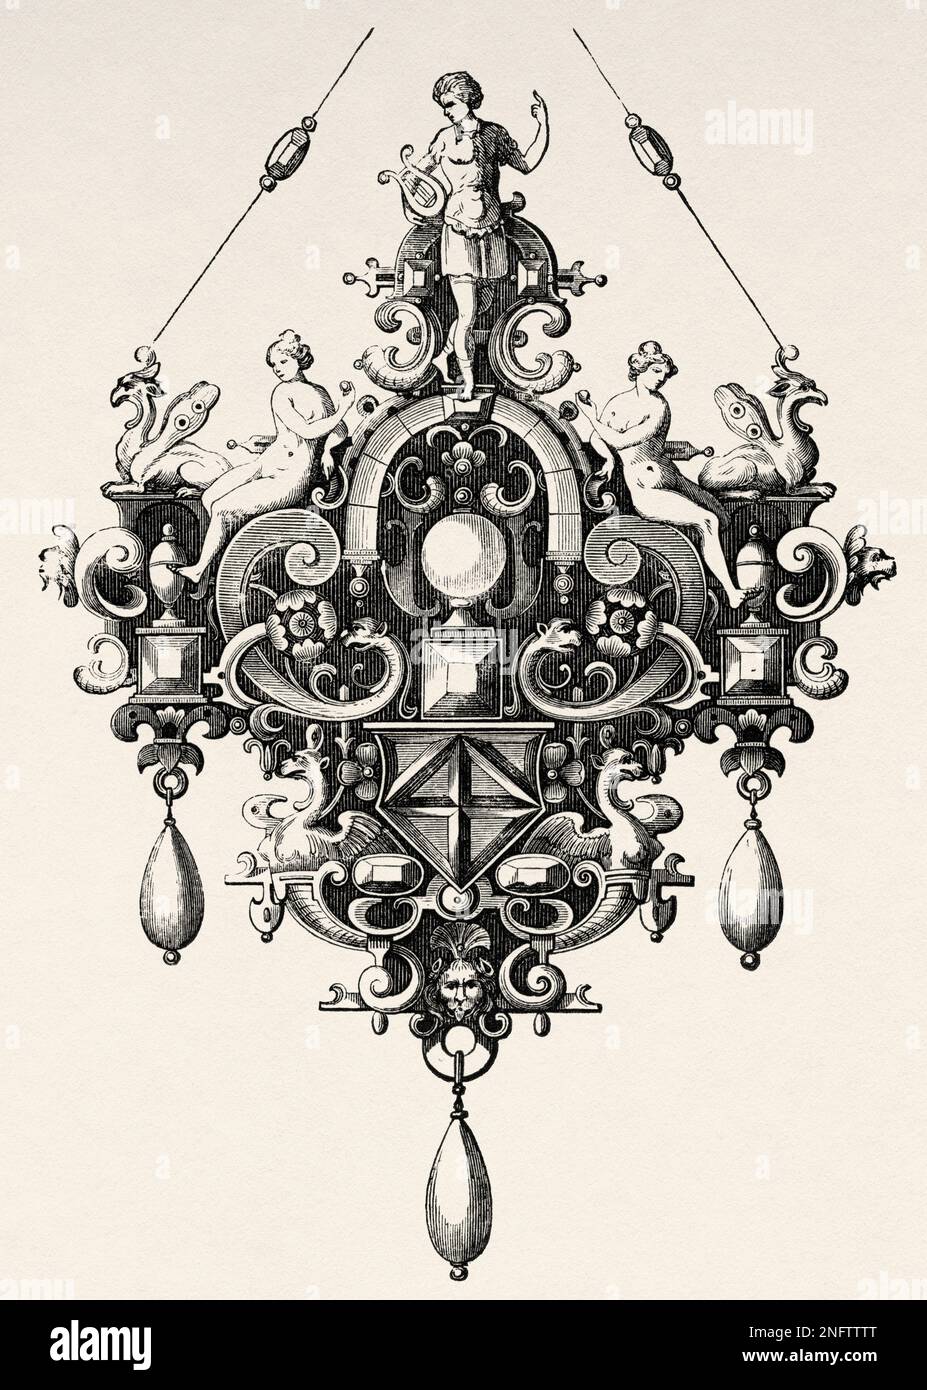 Pendant after a model by Benvenuto Cellini, 16th century. The Arts of the Middle Ages and at the Period of the Renaissance by Paul Lacroix, 1874 Stock Photo